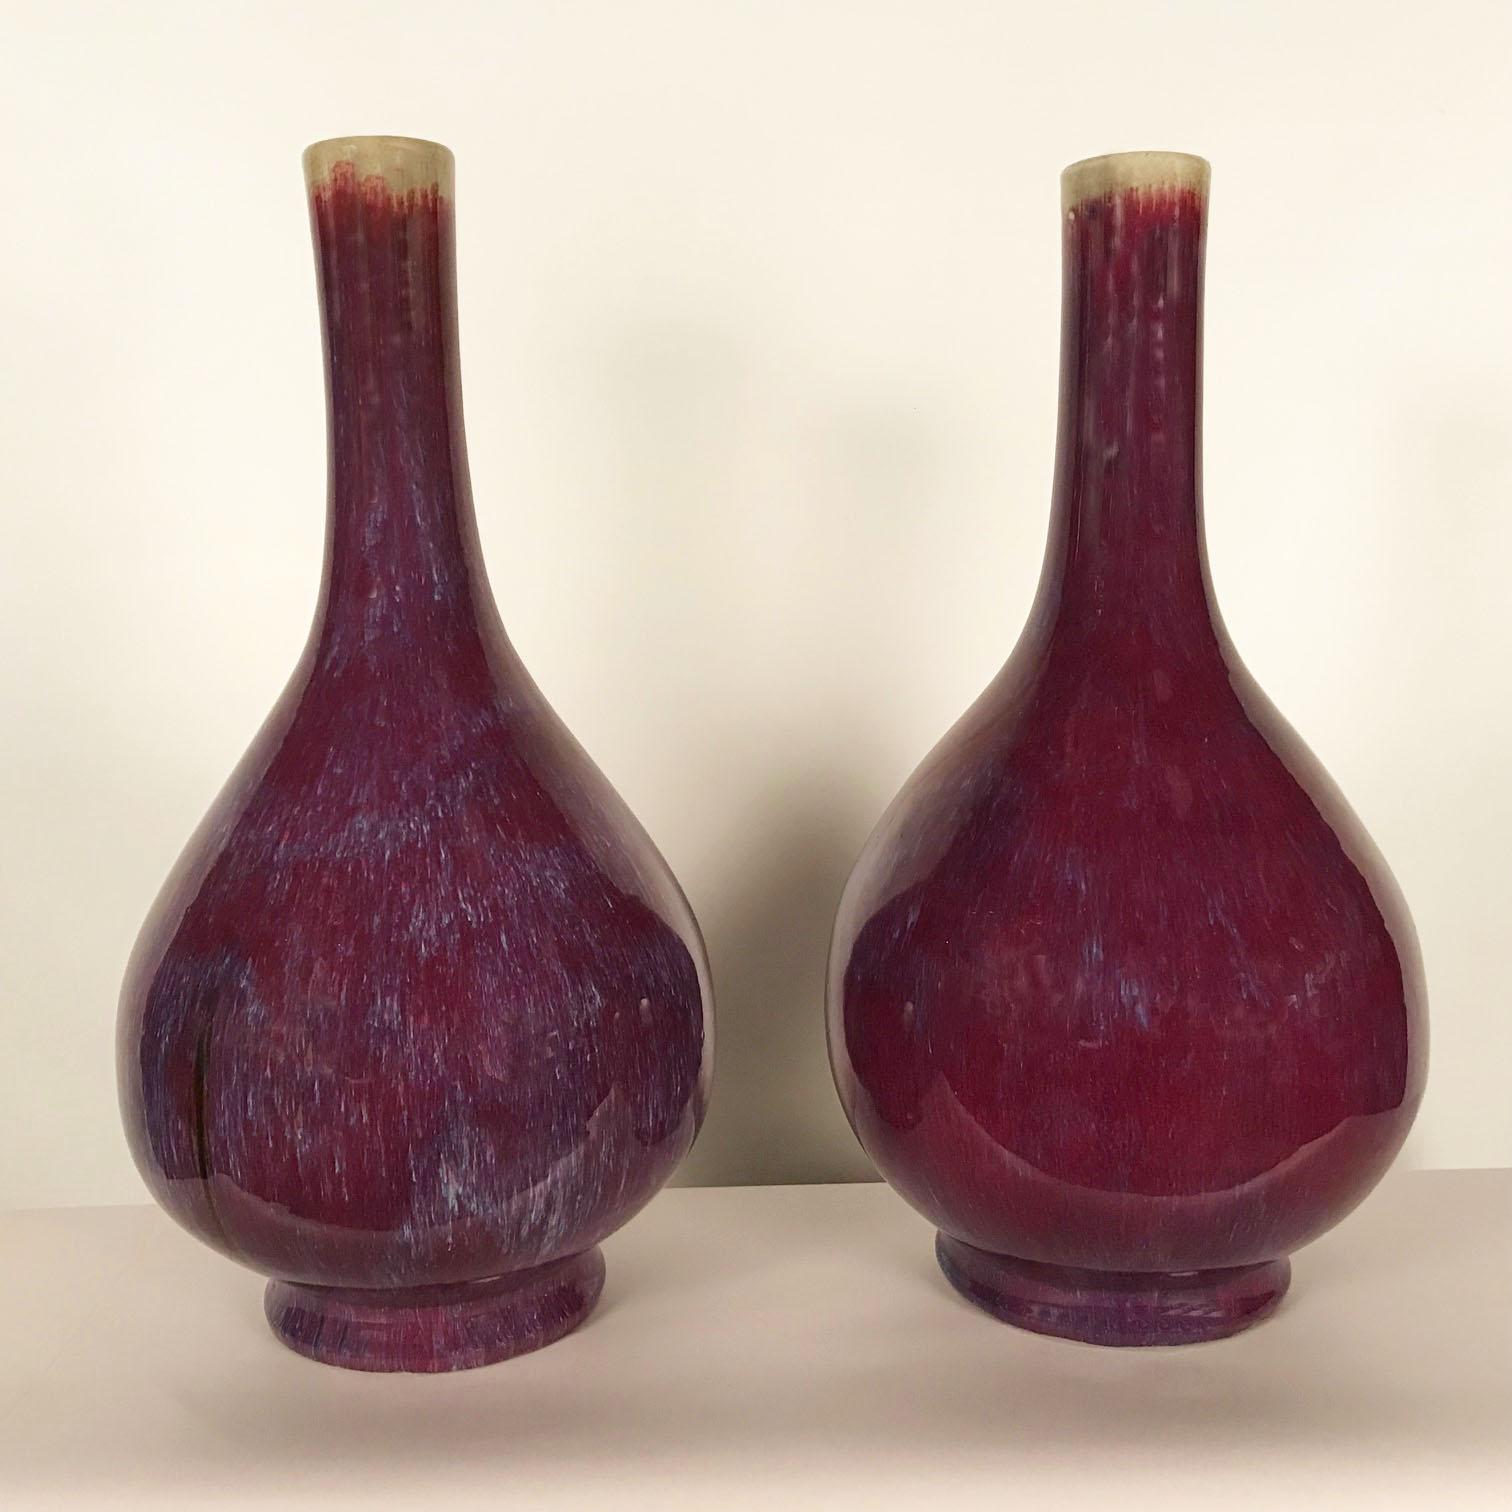 This pair are of a color that has more purple than sang-de-bouf has typically. I hope our photos catch the subtlety of the shade. It is difficult to describe such a nuanced and complex tone. They are not precisely the same size but are very slightly